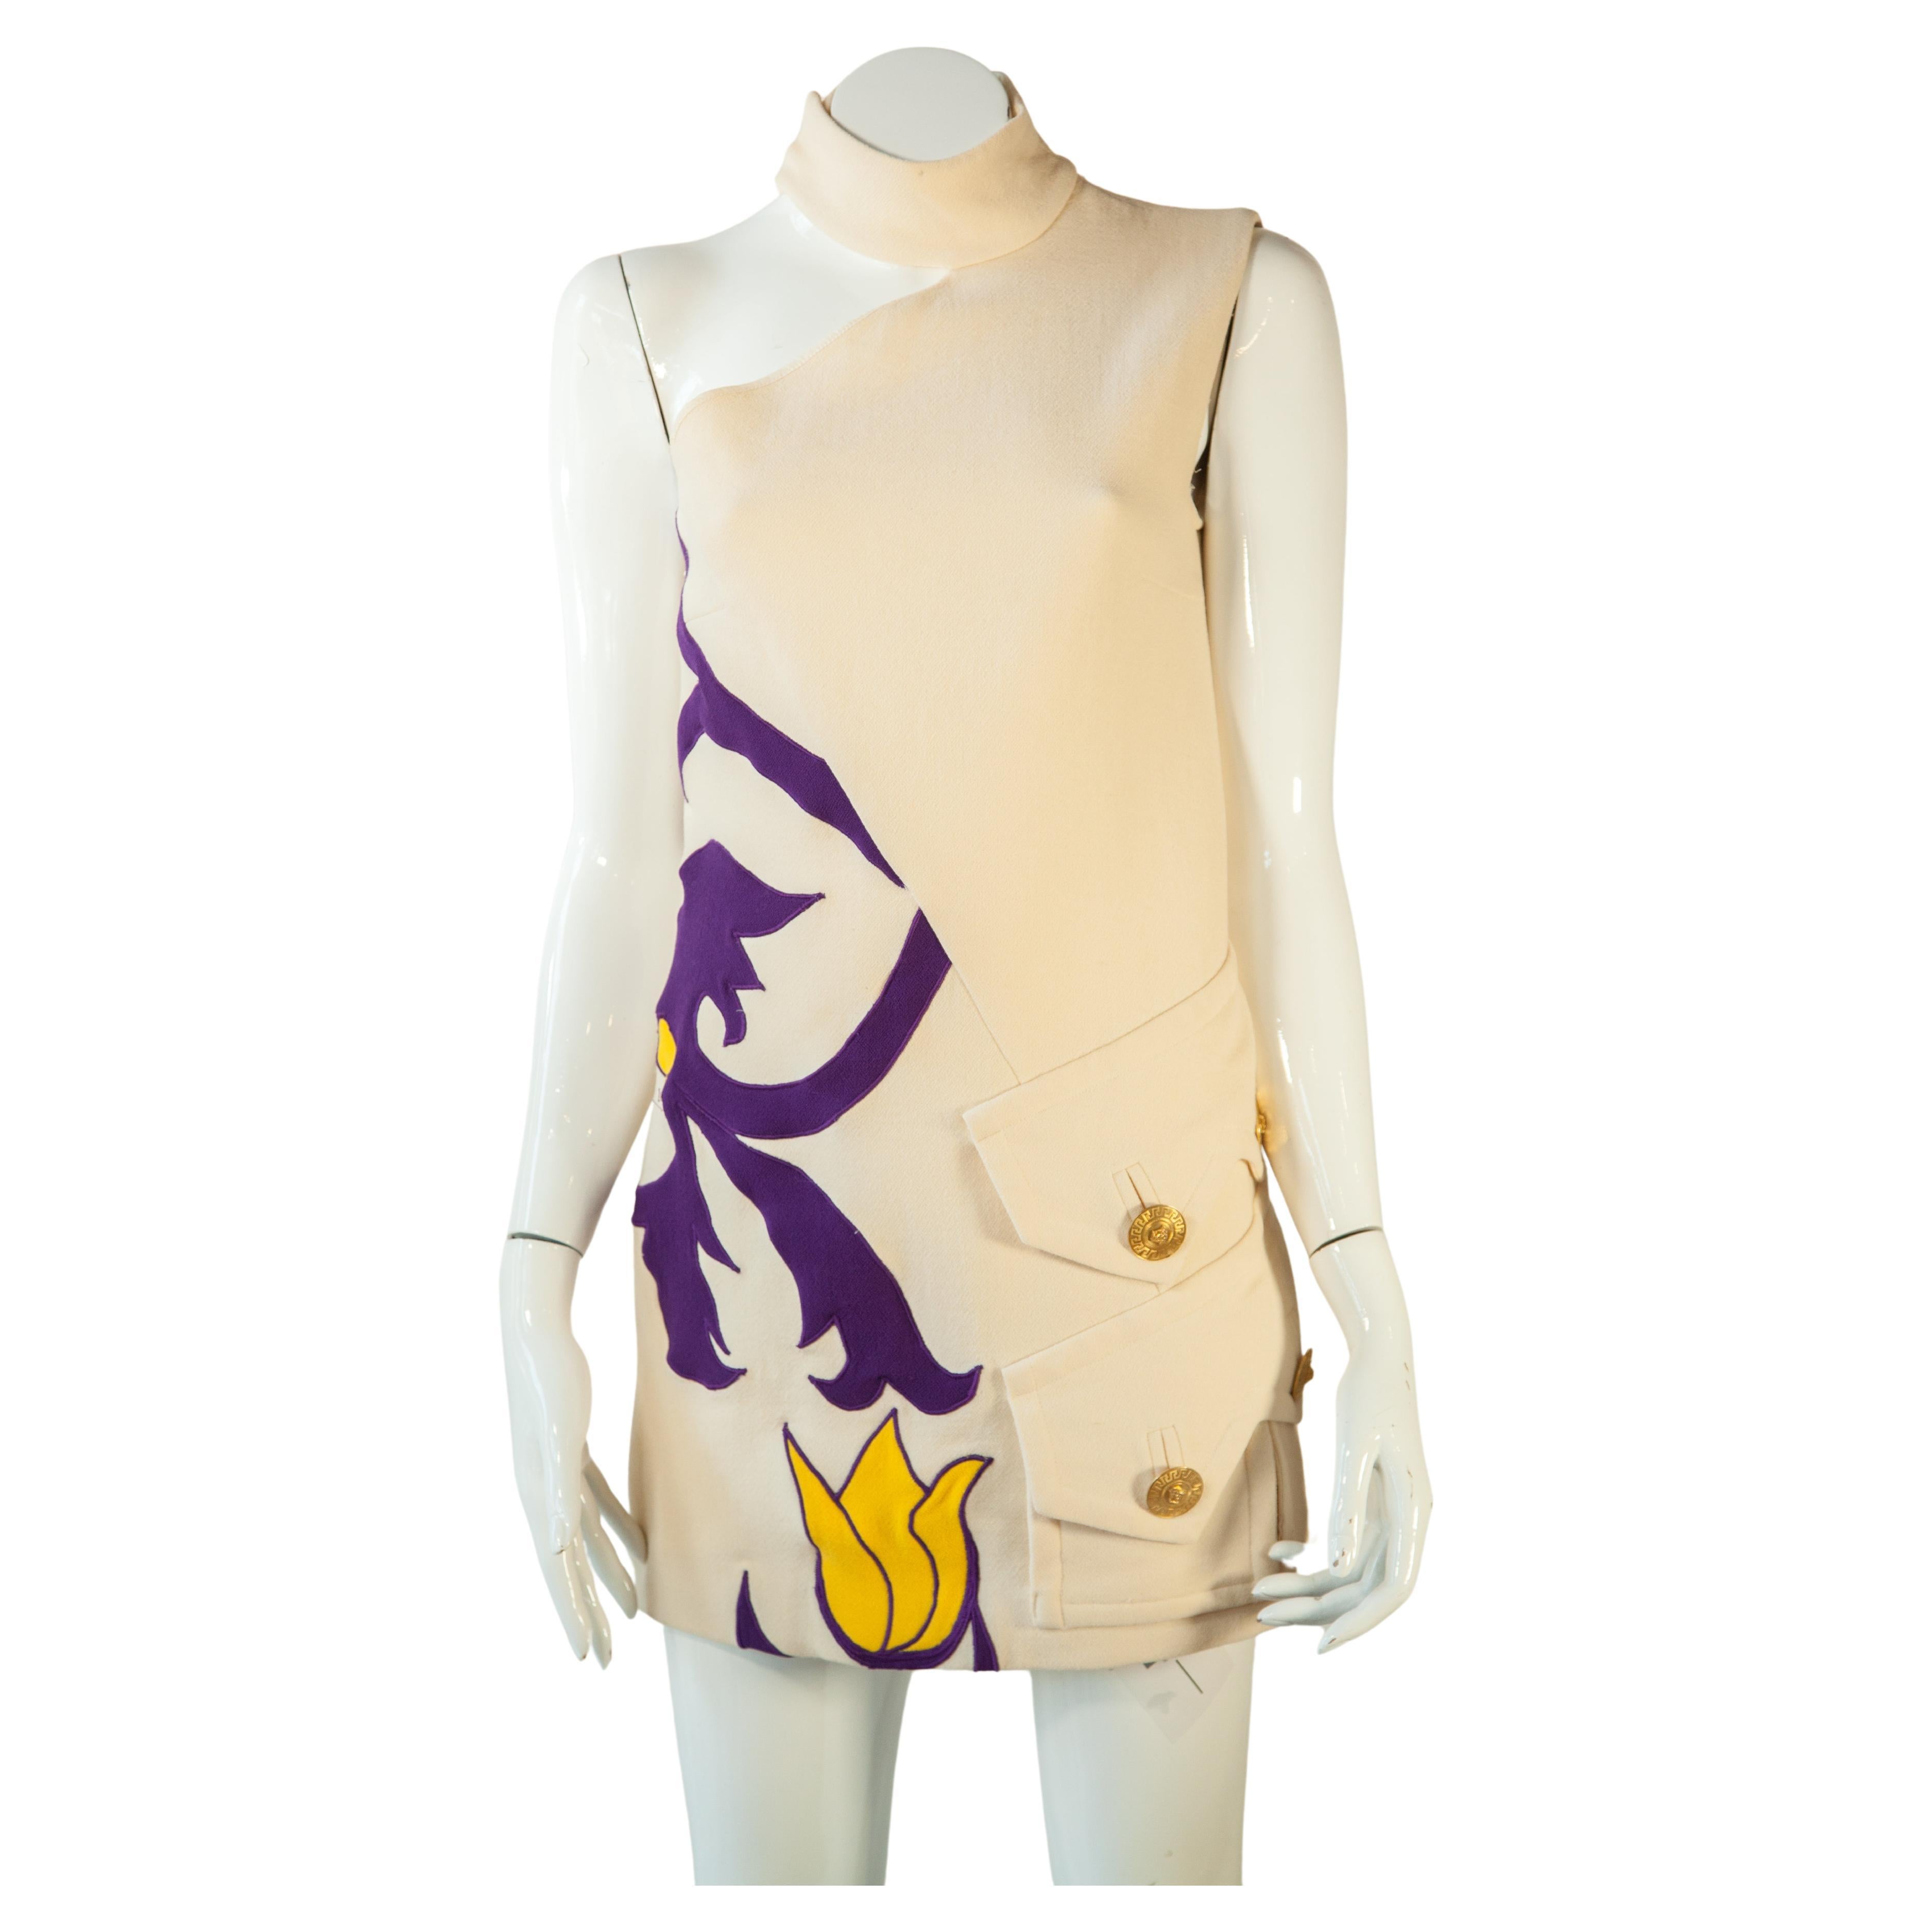 Versace, Baroque Tulip Dress with Gilded Medusa Buttons, 2011 For Sale